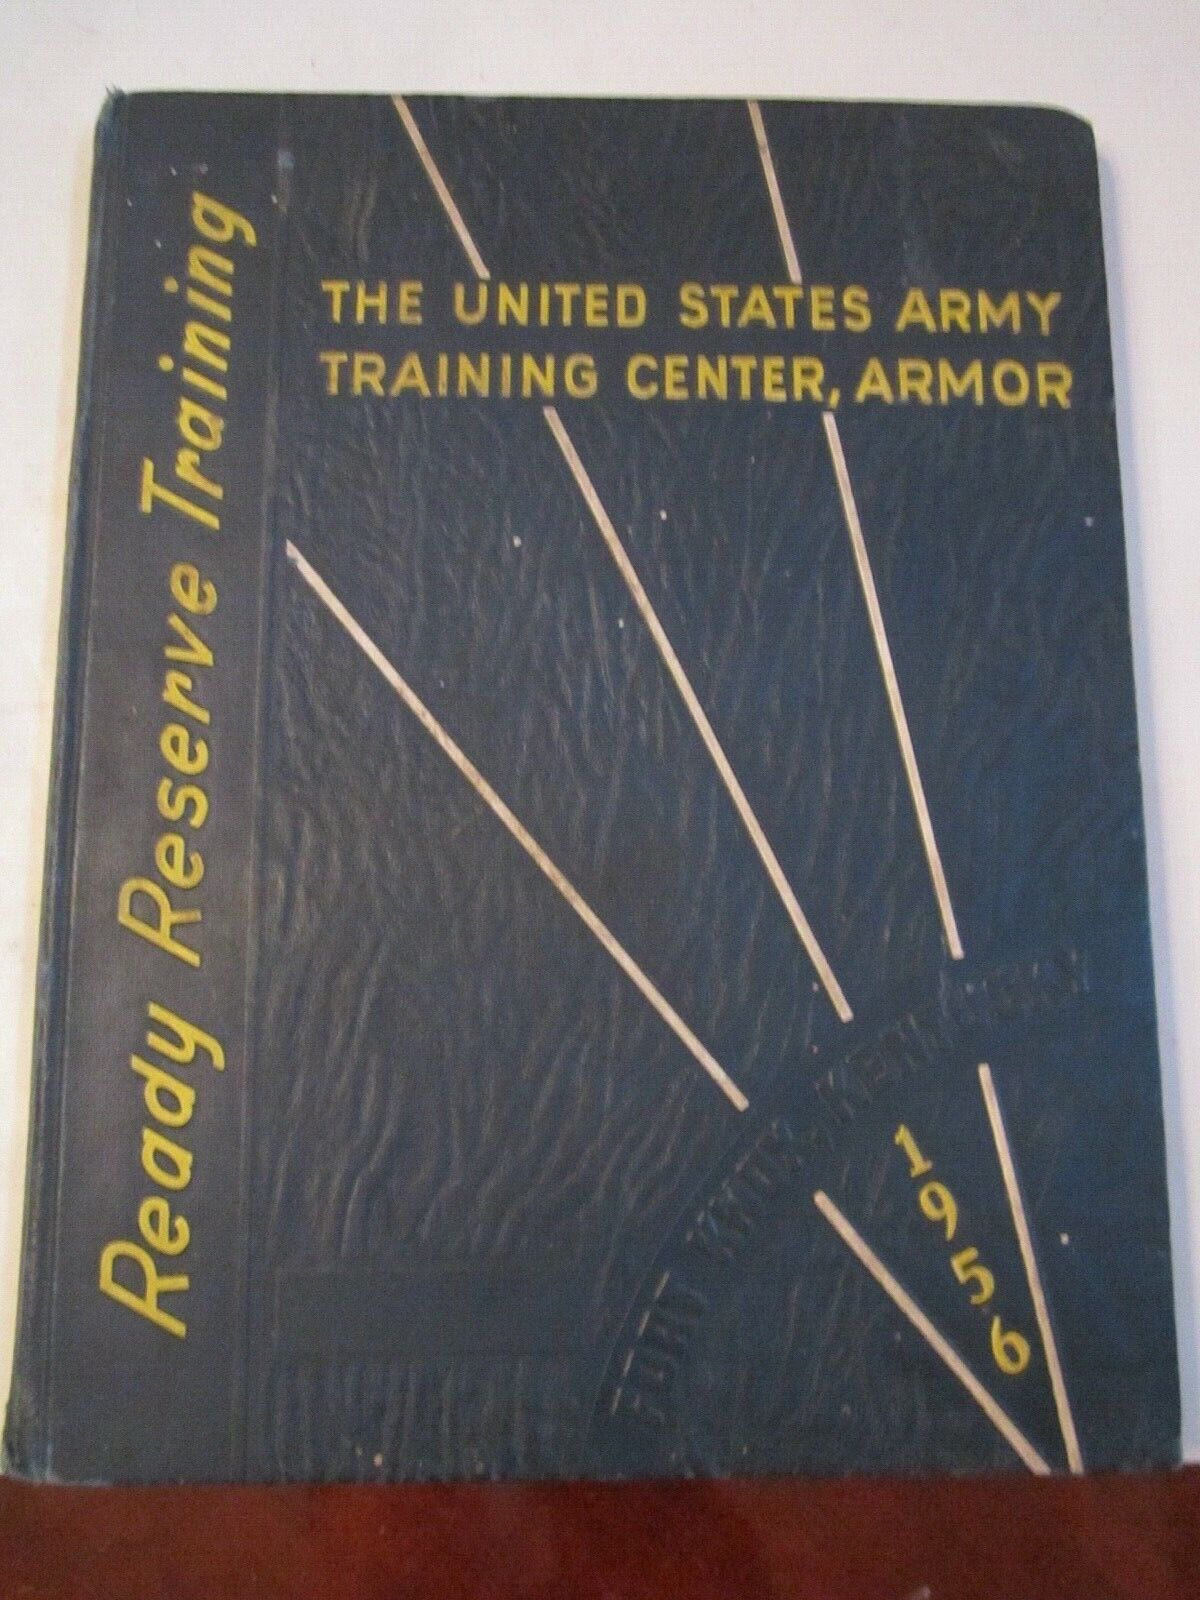 1956 U.S. ARMY TRAINING CENTER YEARBOOK - FORT KNOX, KENTUCKY